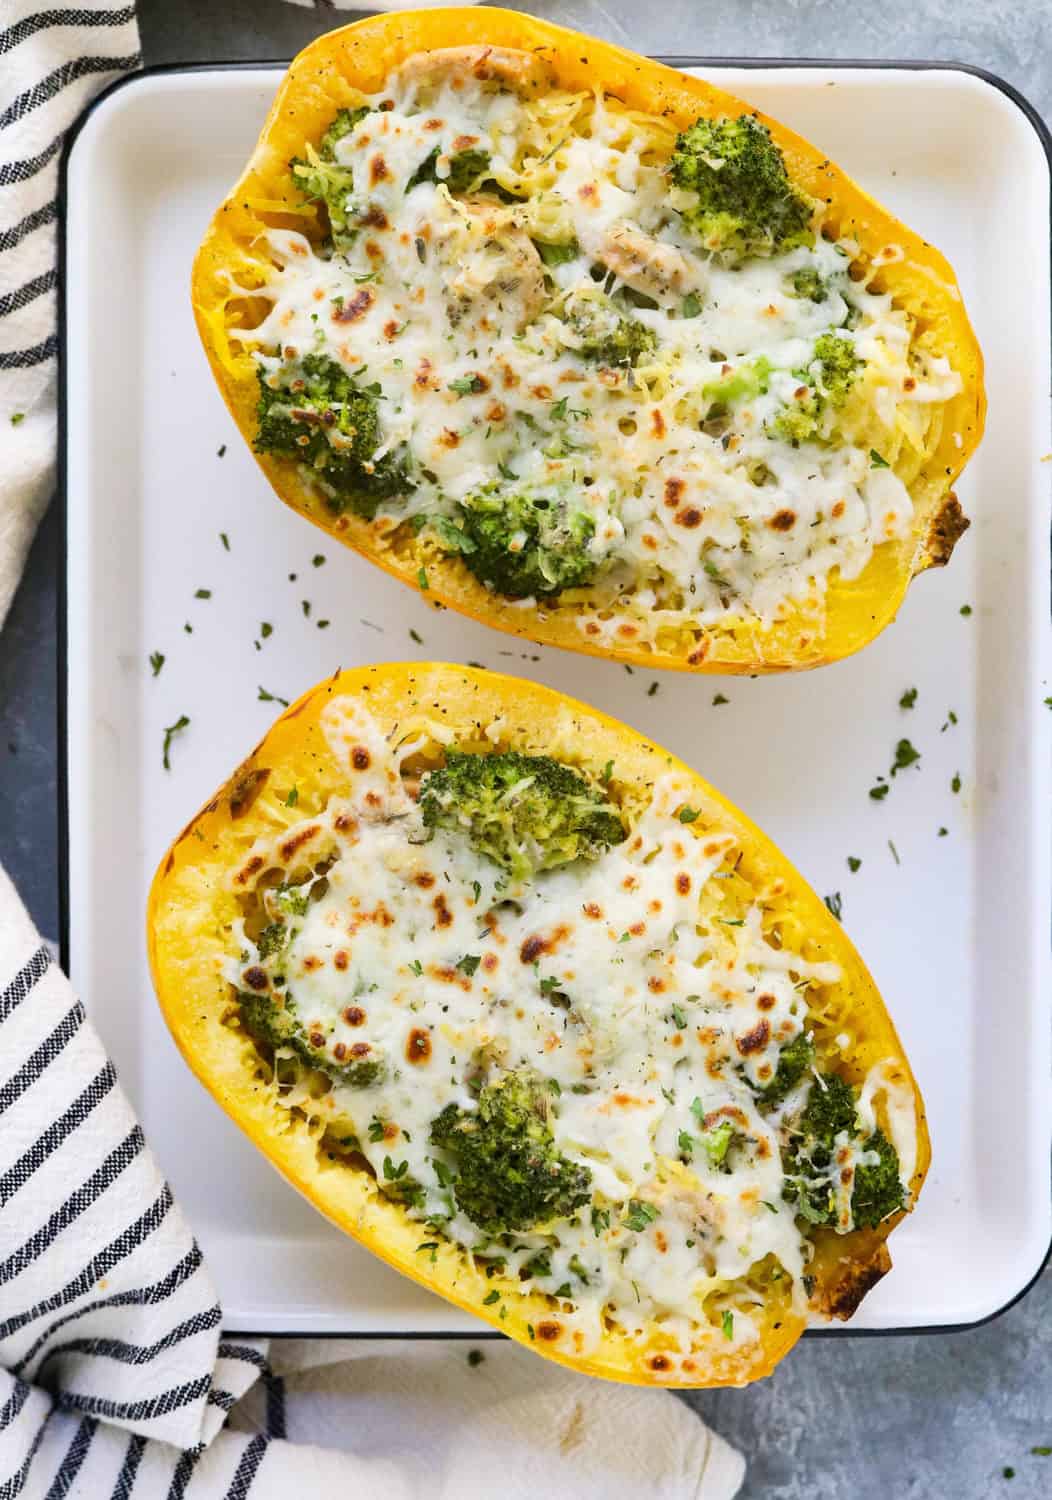 two baked spaghetti squash filling with broccoli and melted cheese on a baking sheet